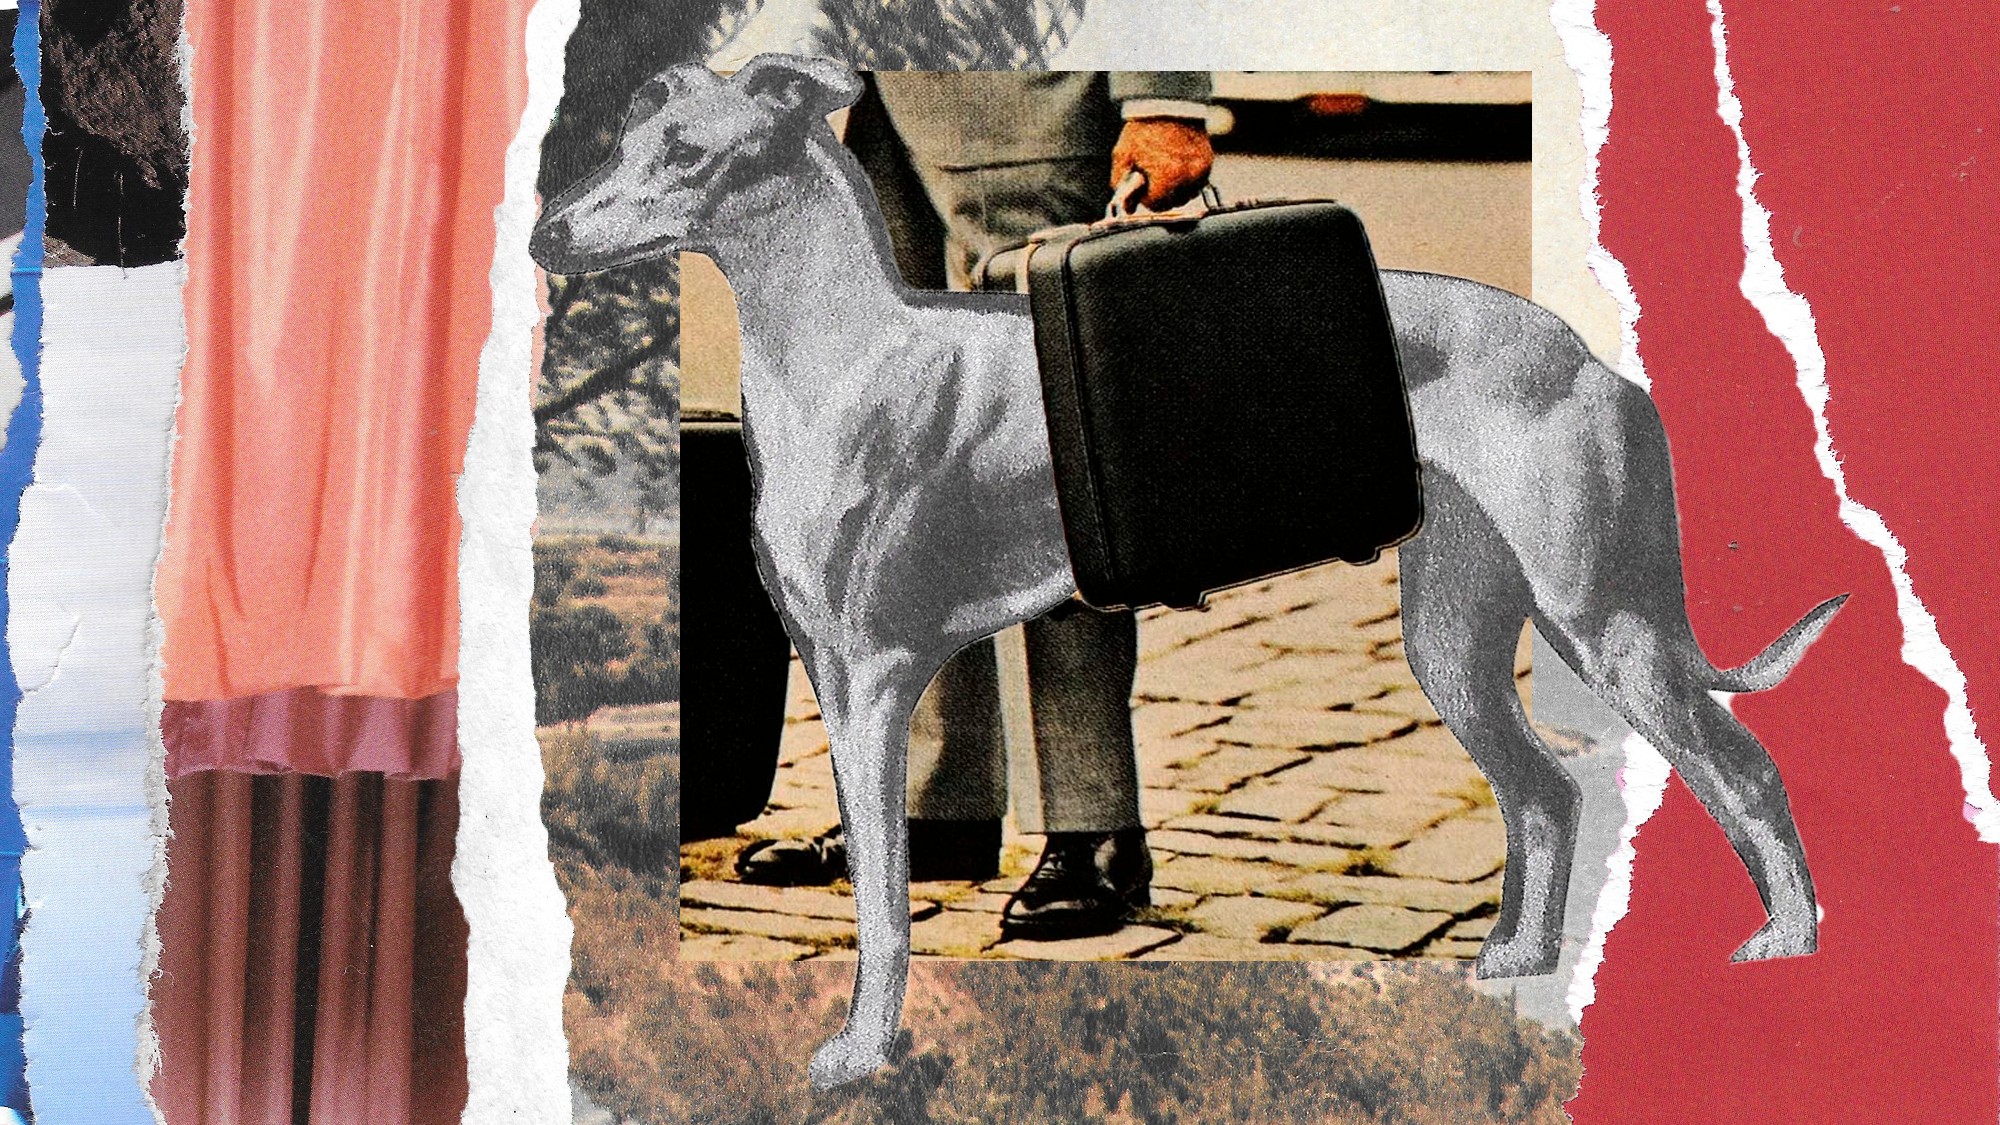 Where Does the 'Dead Dog in a Suitcase' Urban Legend Come From?